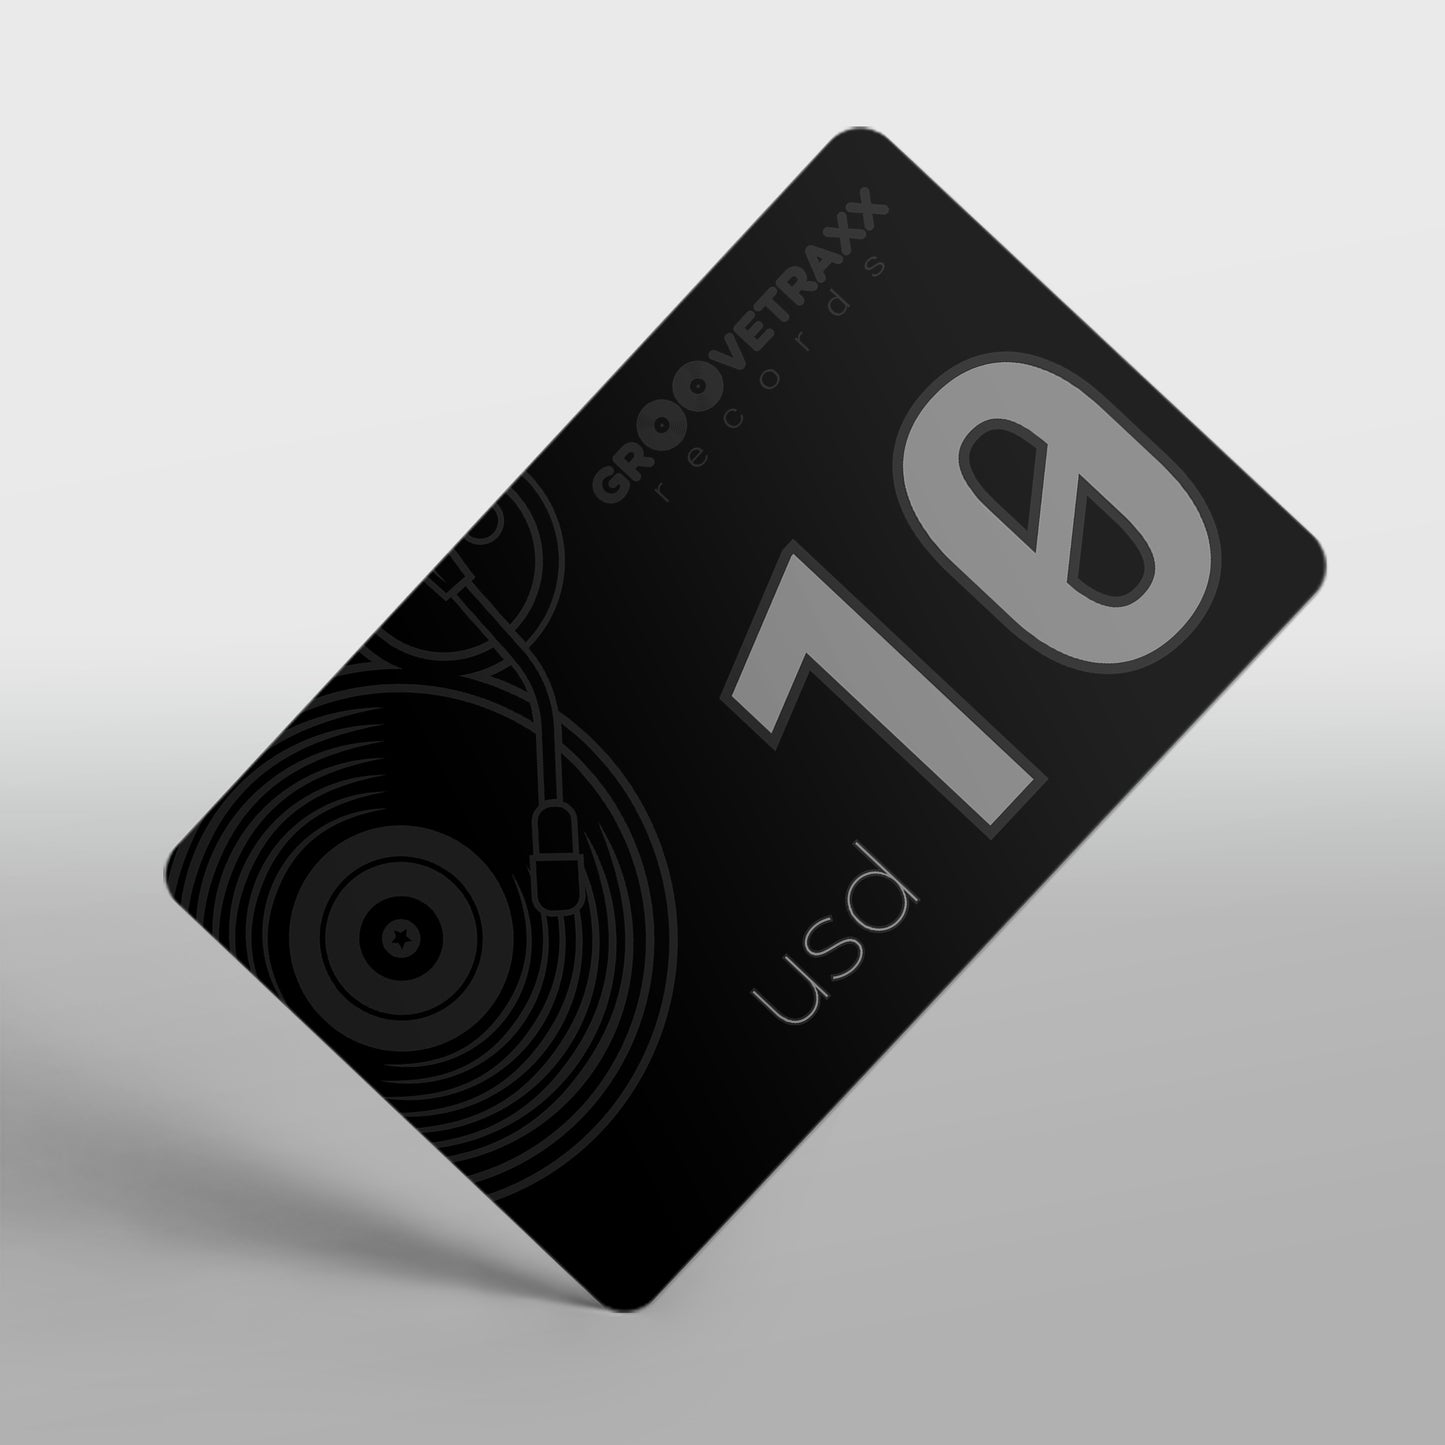 TEST PRODUCT: USD GIFT CARD